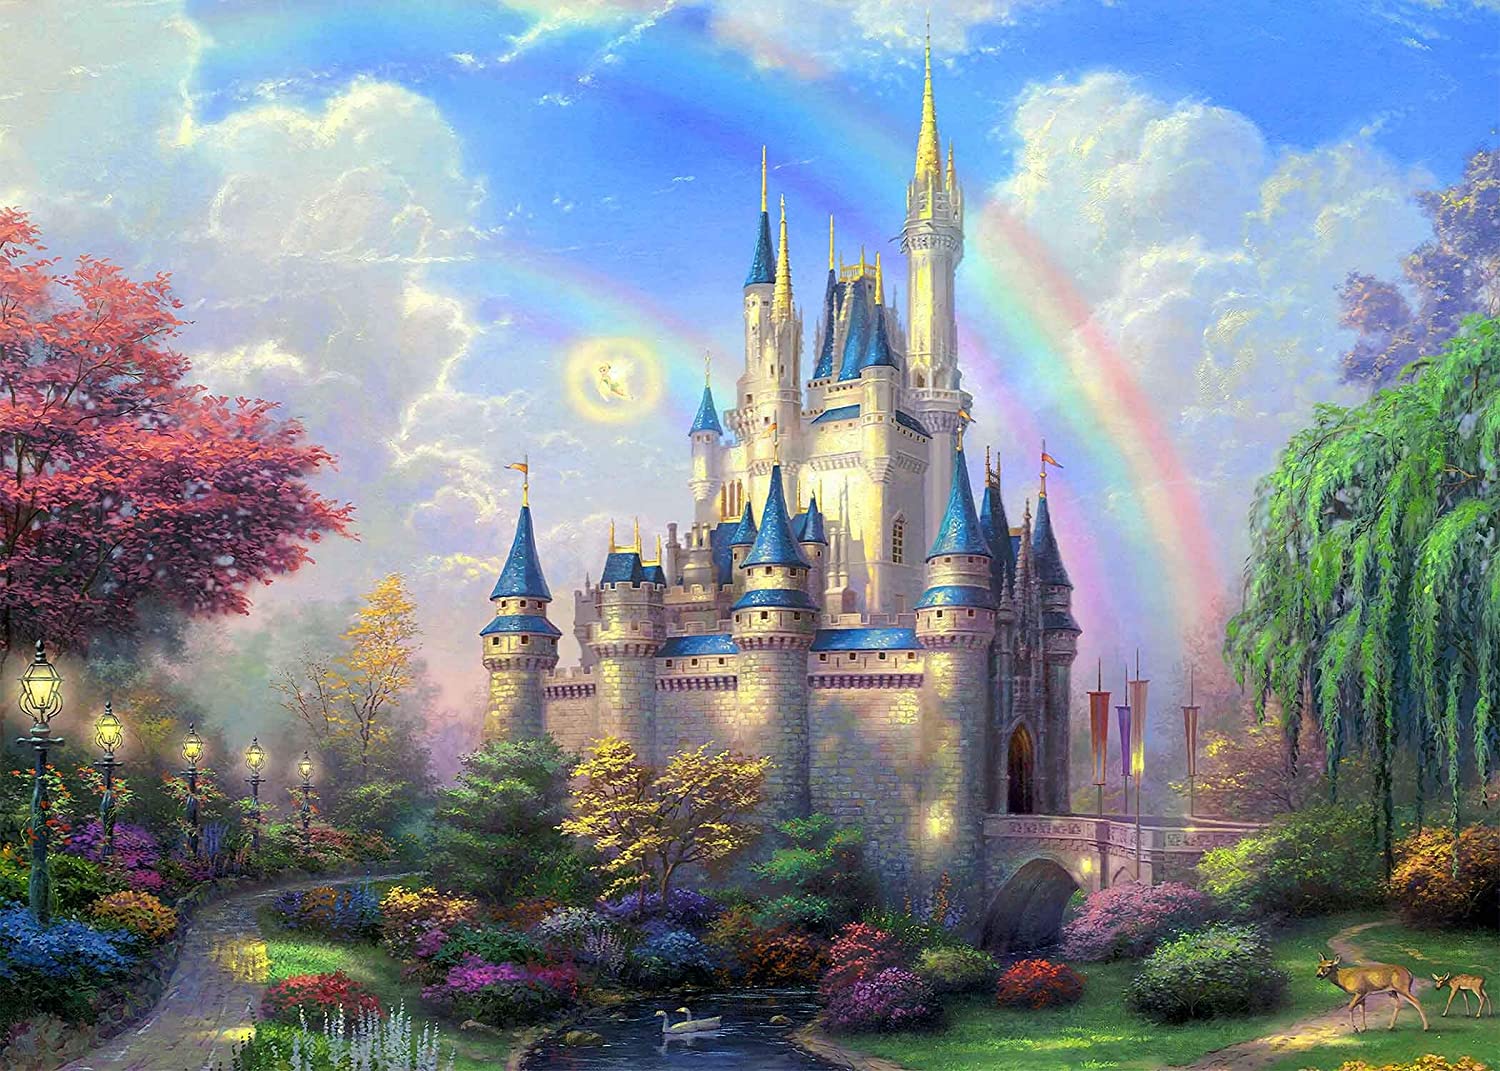 Amazon.com, 7x5ft Dreamy Castle Photography Backdrop for Kids Fairy Tale Princess and Prince Entertainment or Birthday Party Photo Background BV043